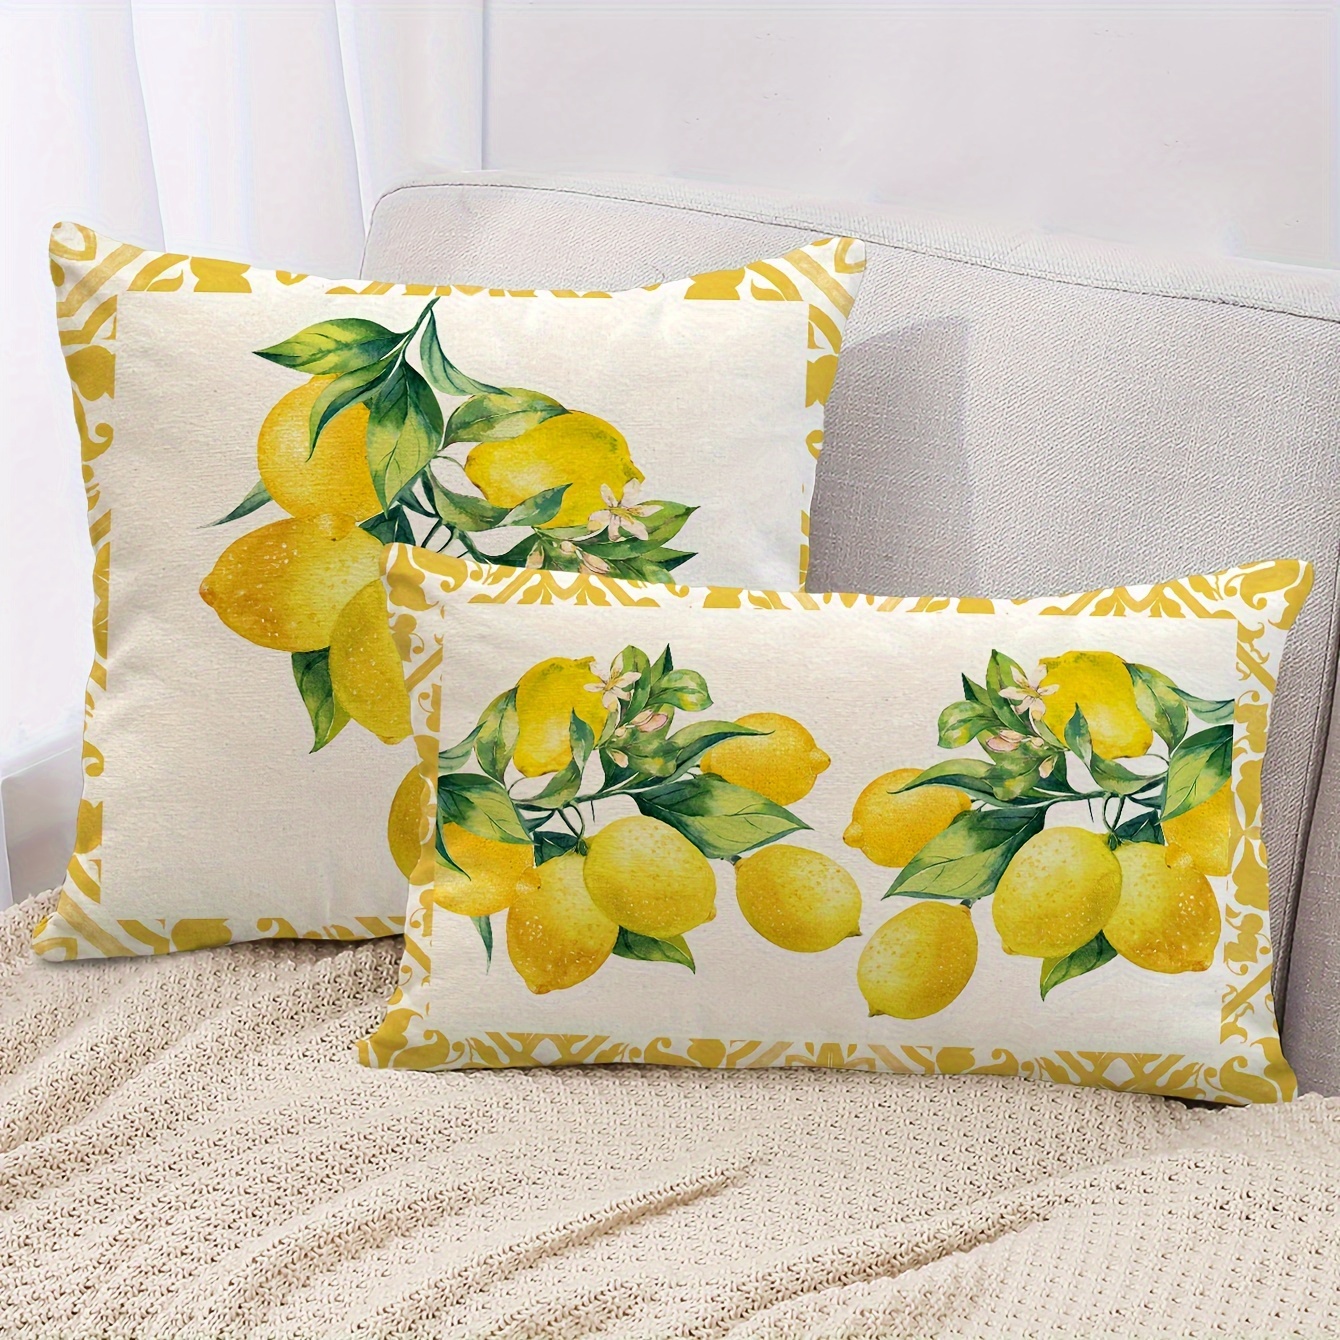 

1pc Rustic Lemon Pillow Cover 17x17 Inches, Yellow Lemons Print Decorative Case, Country-style Sofa/car/bedroom Decor, 100% Linen Fabric, Vibrant Summer Fruit Design, Pillowcase Only – No Insert